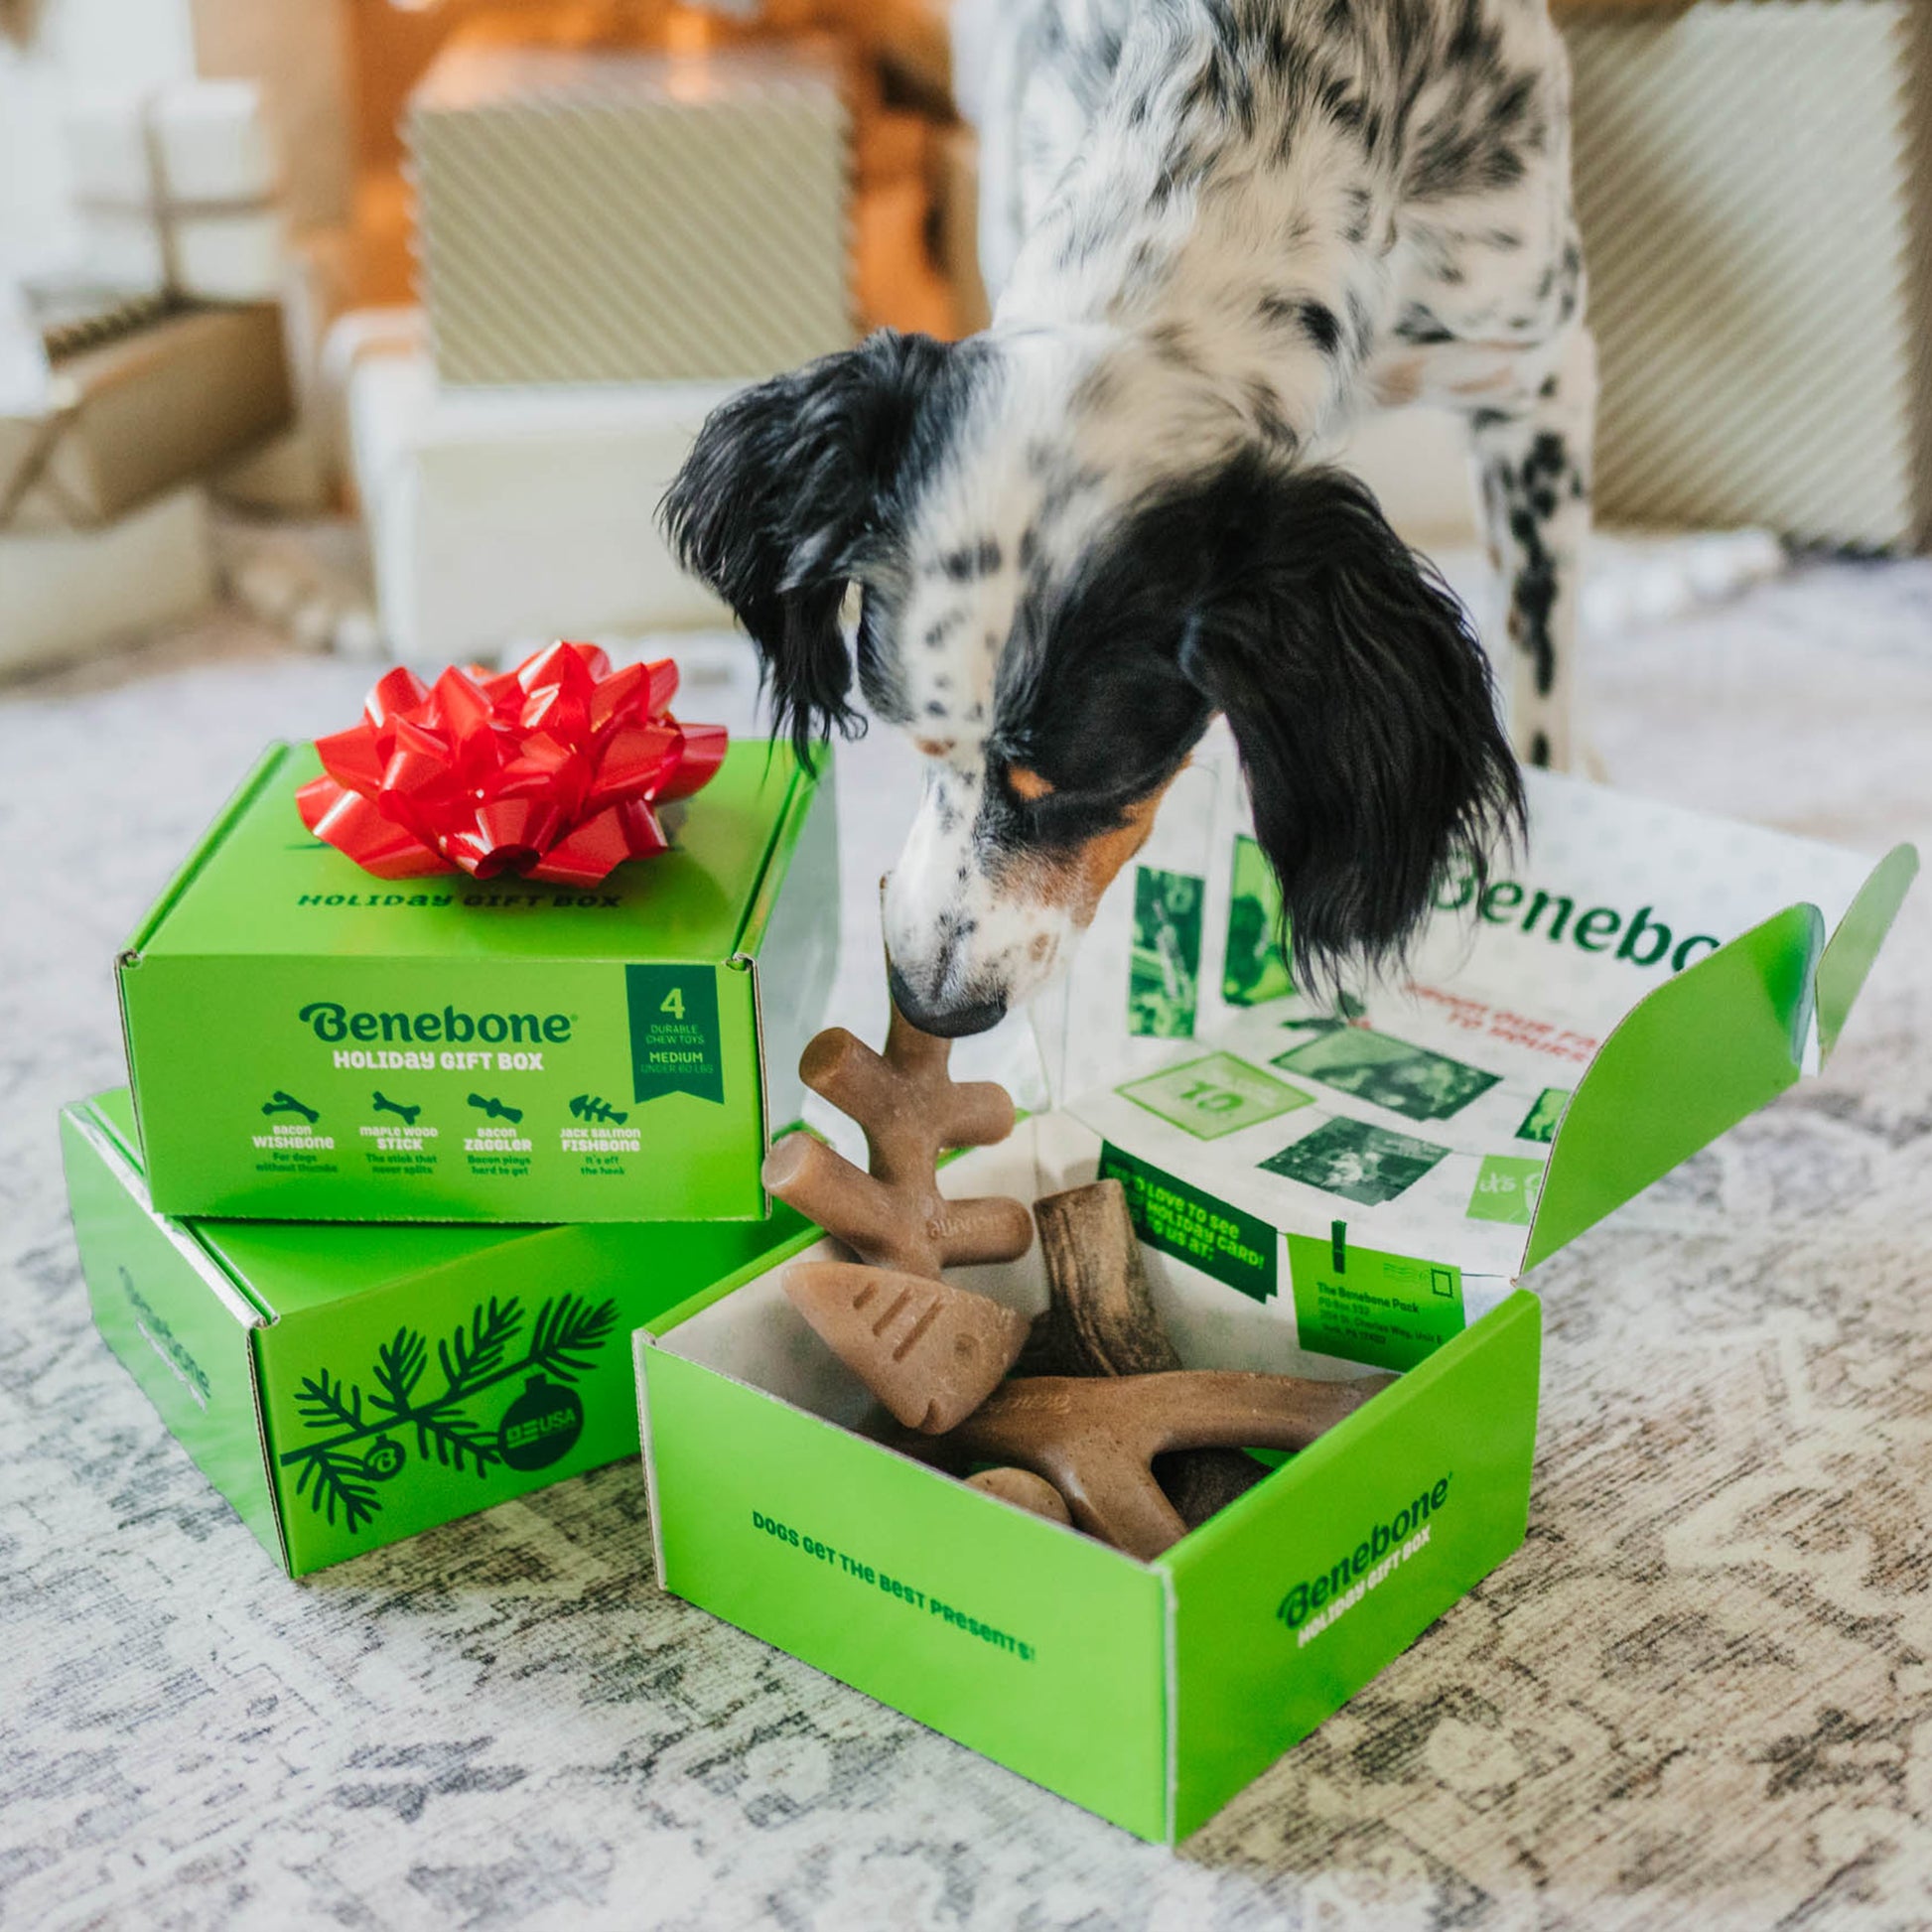 benebone holiday gift boxes and dog